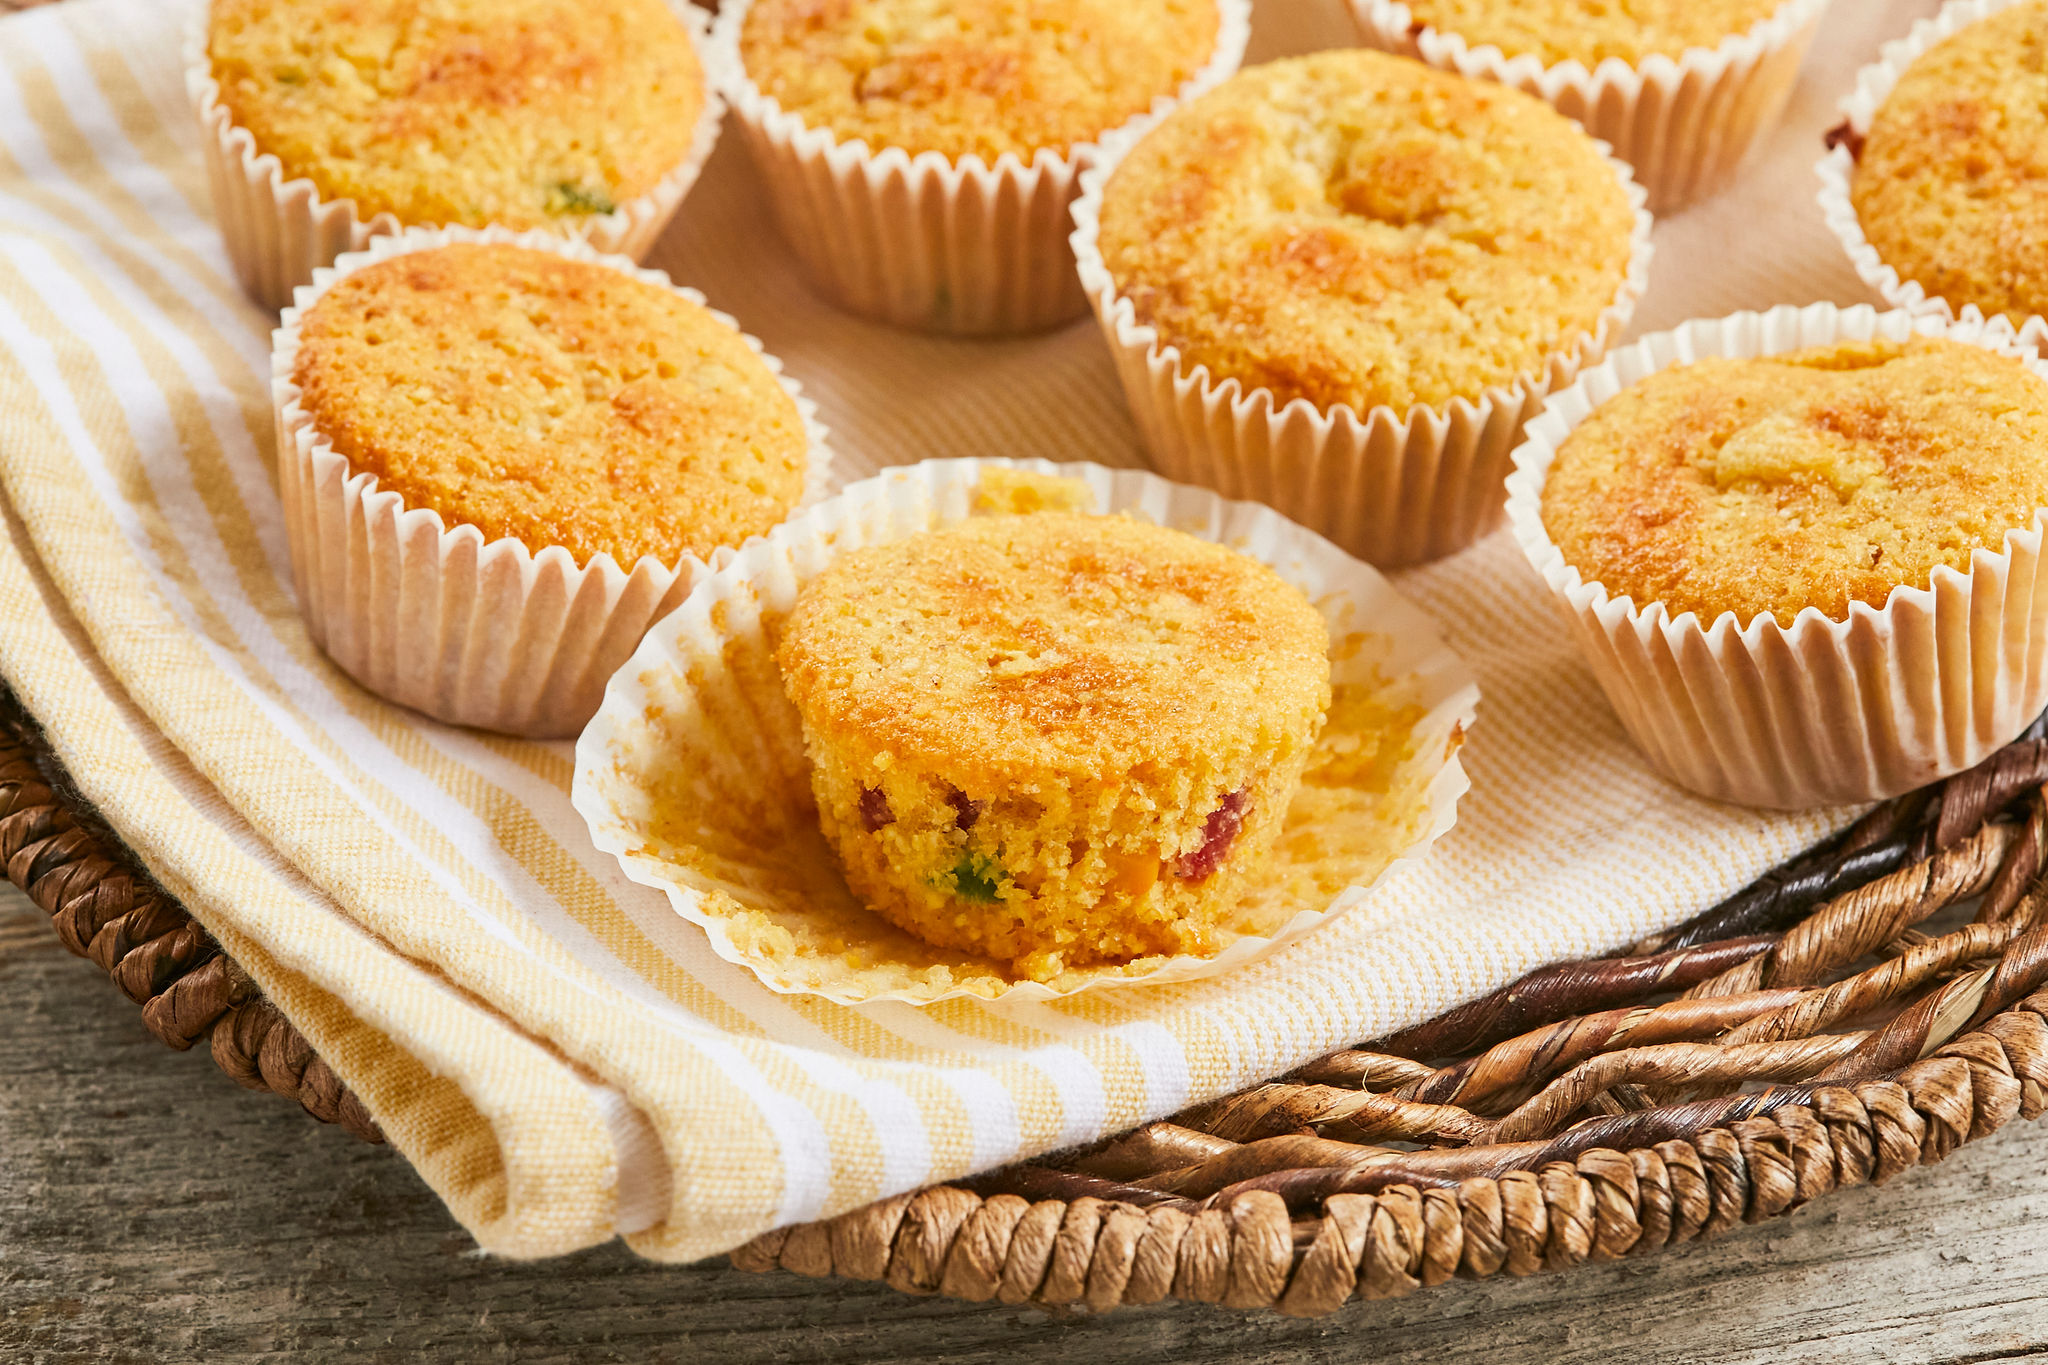 Cornbread muffins baked and ready to eat.